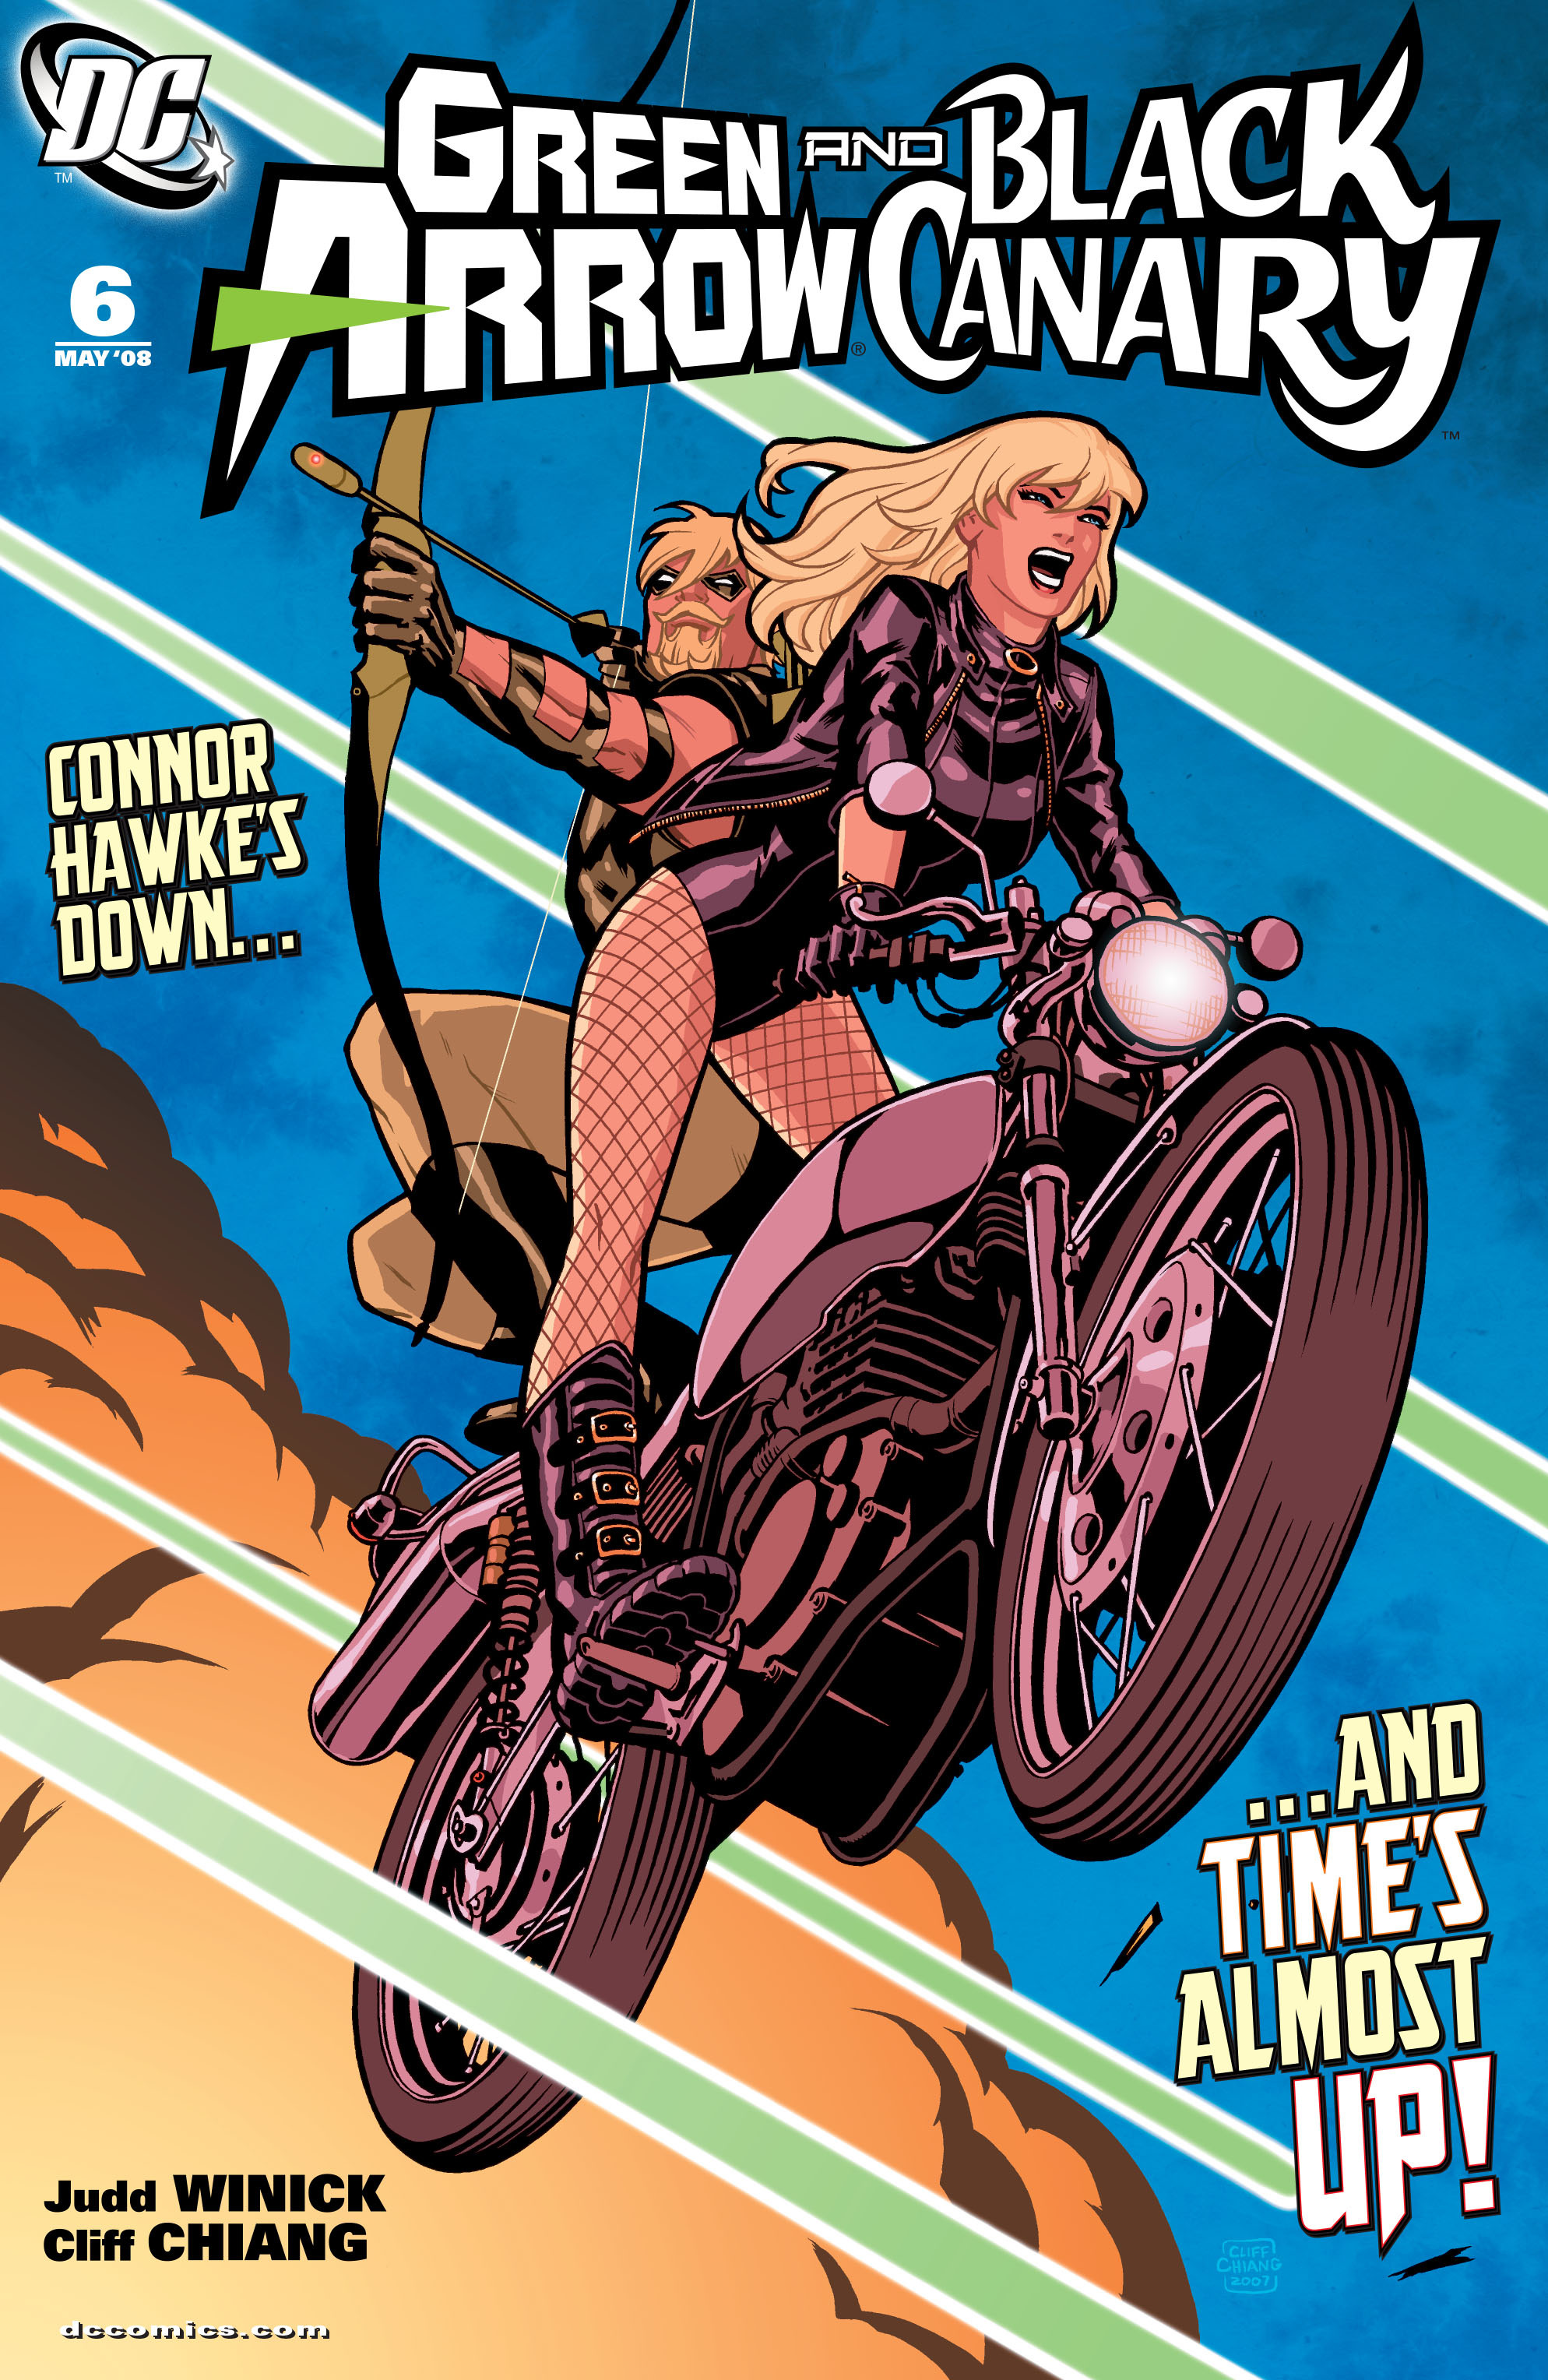 Read online Green Arrow/Black Canary comic -  Issue #6 - 1